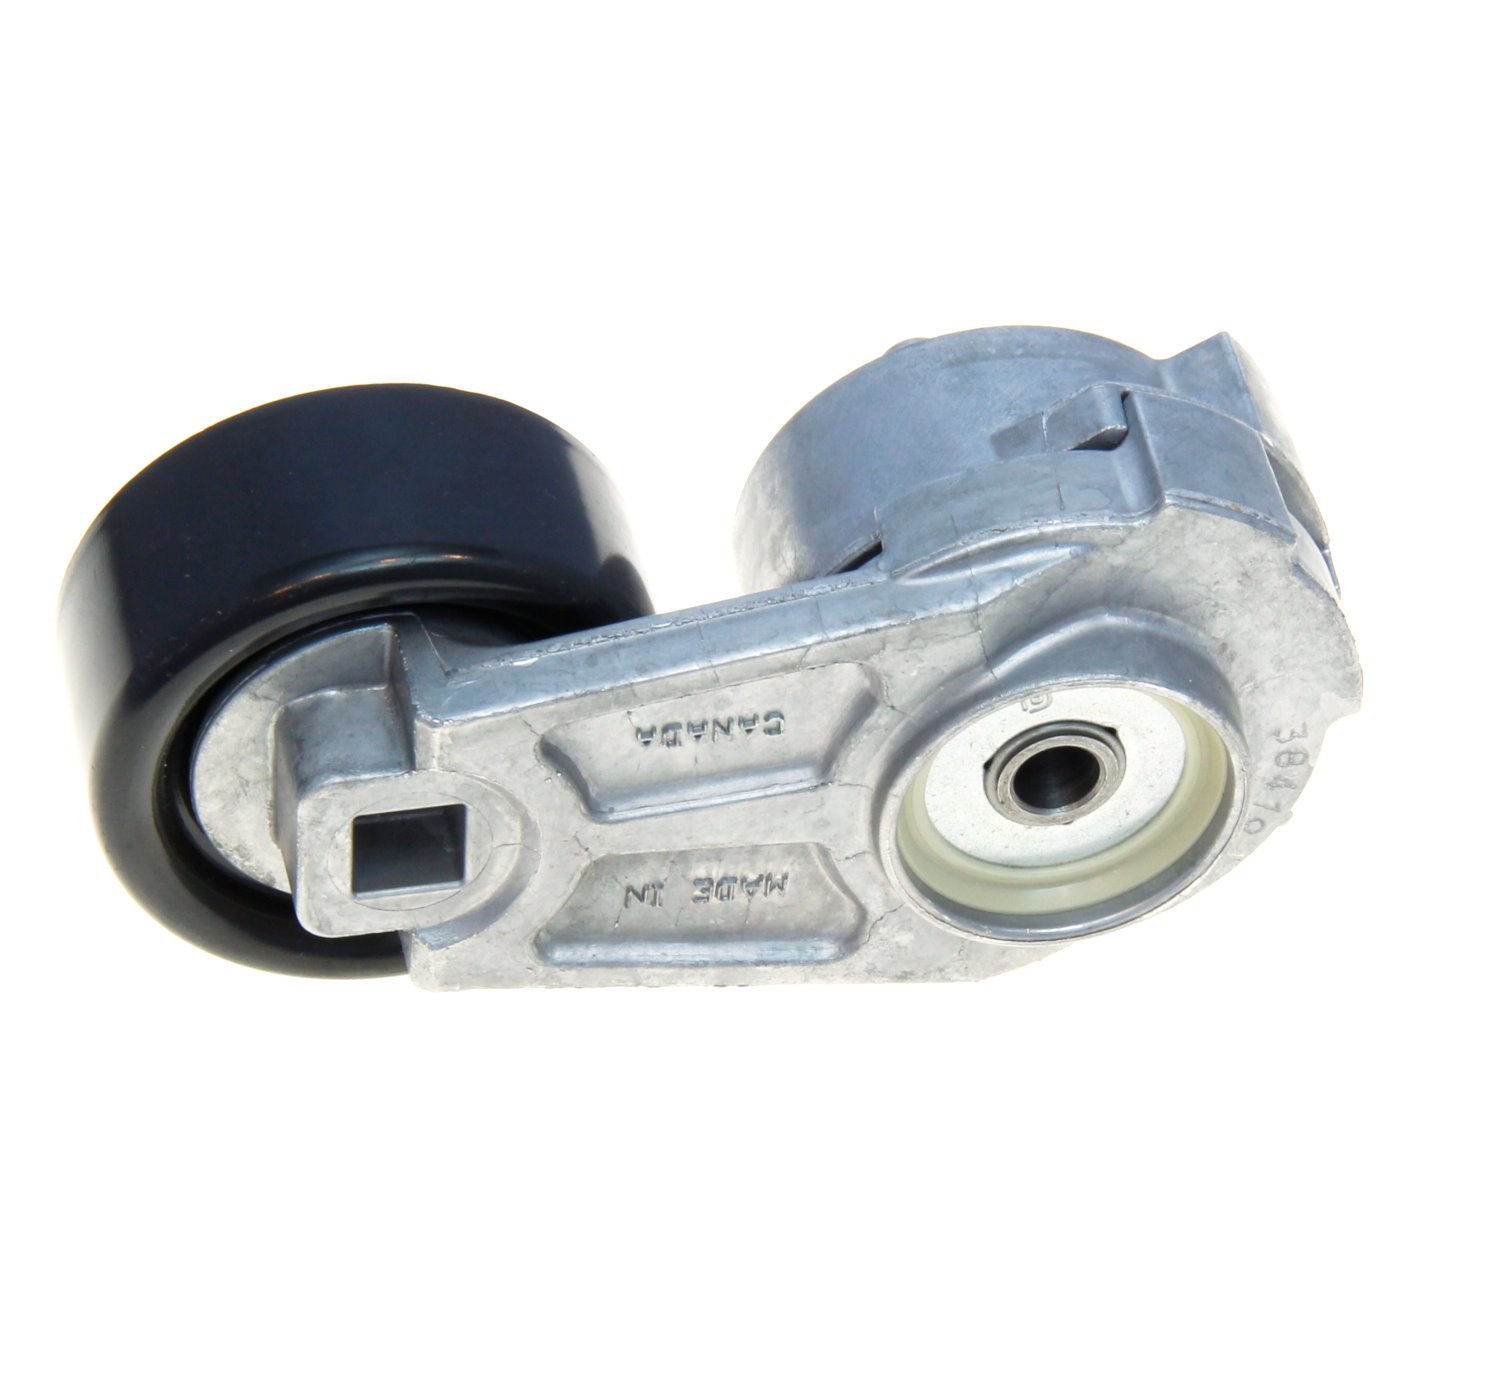 DriveAlign Automatic Belt Tensioners